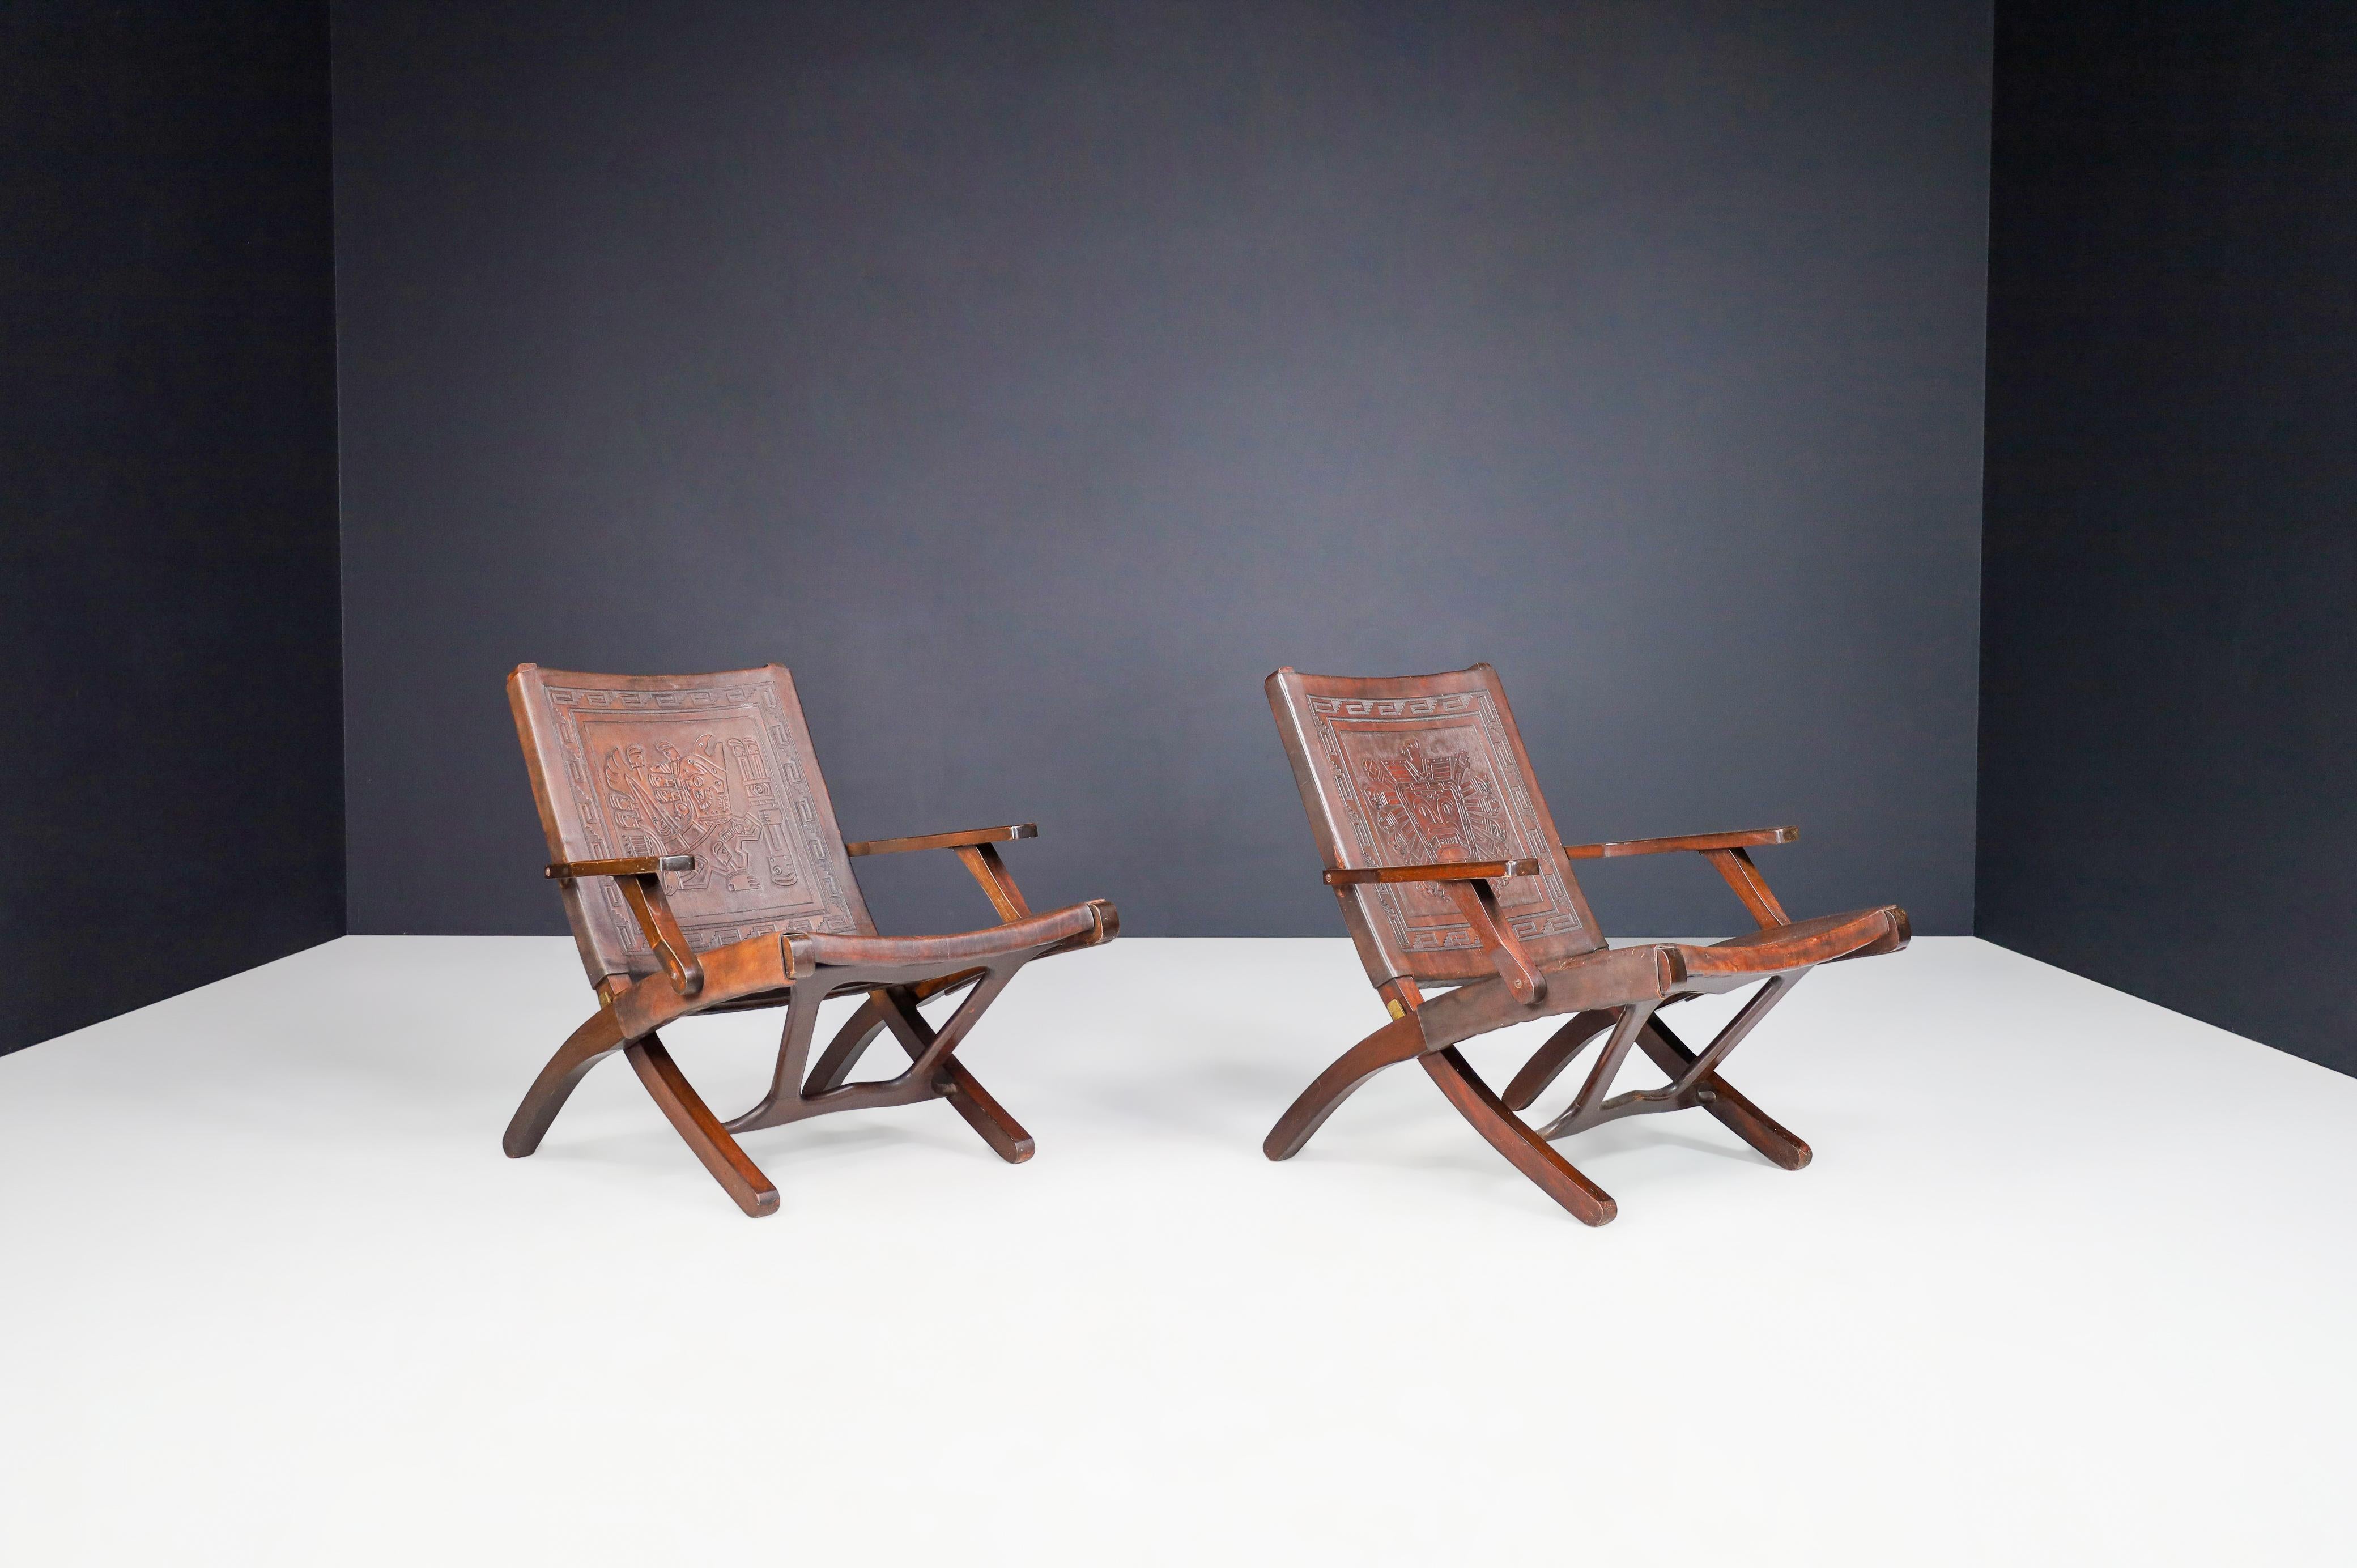 Angel I. Pazmino Cognac-colored Saddle Leather Arm Chairs Ecuador 1970s   For Sale 1